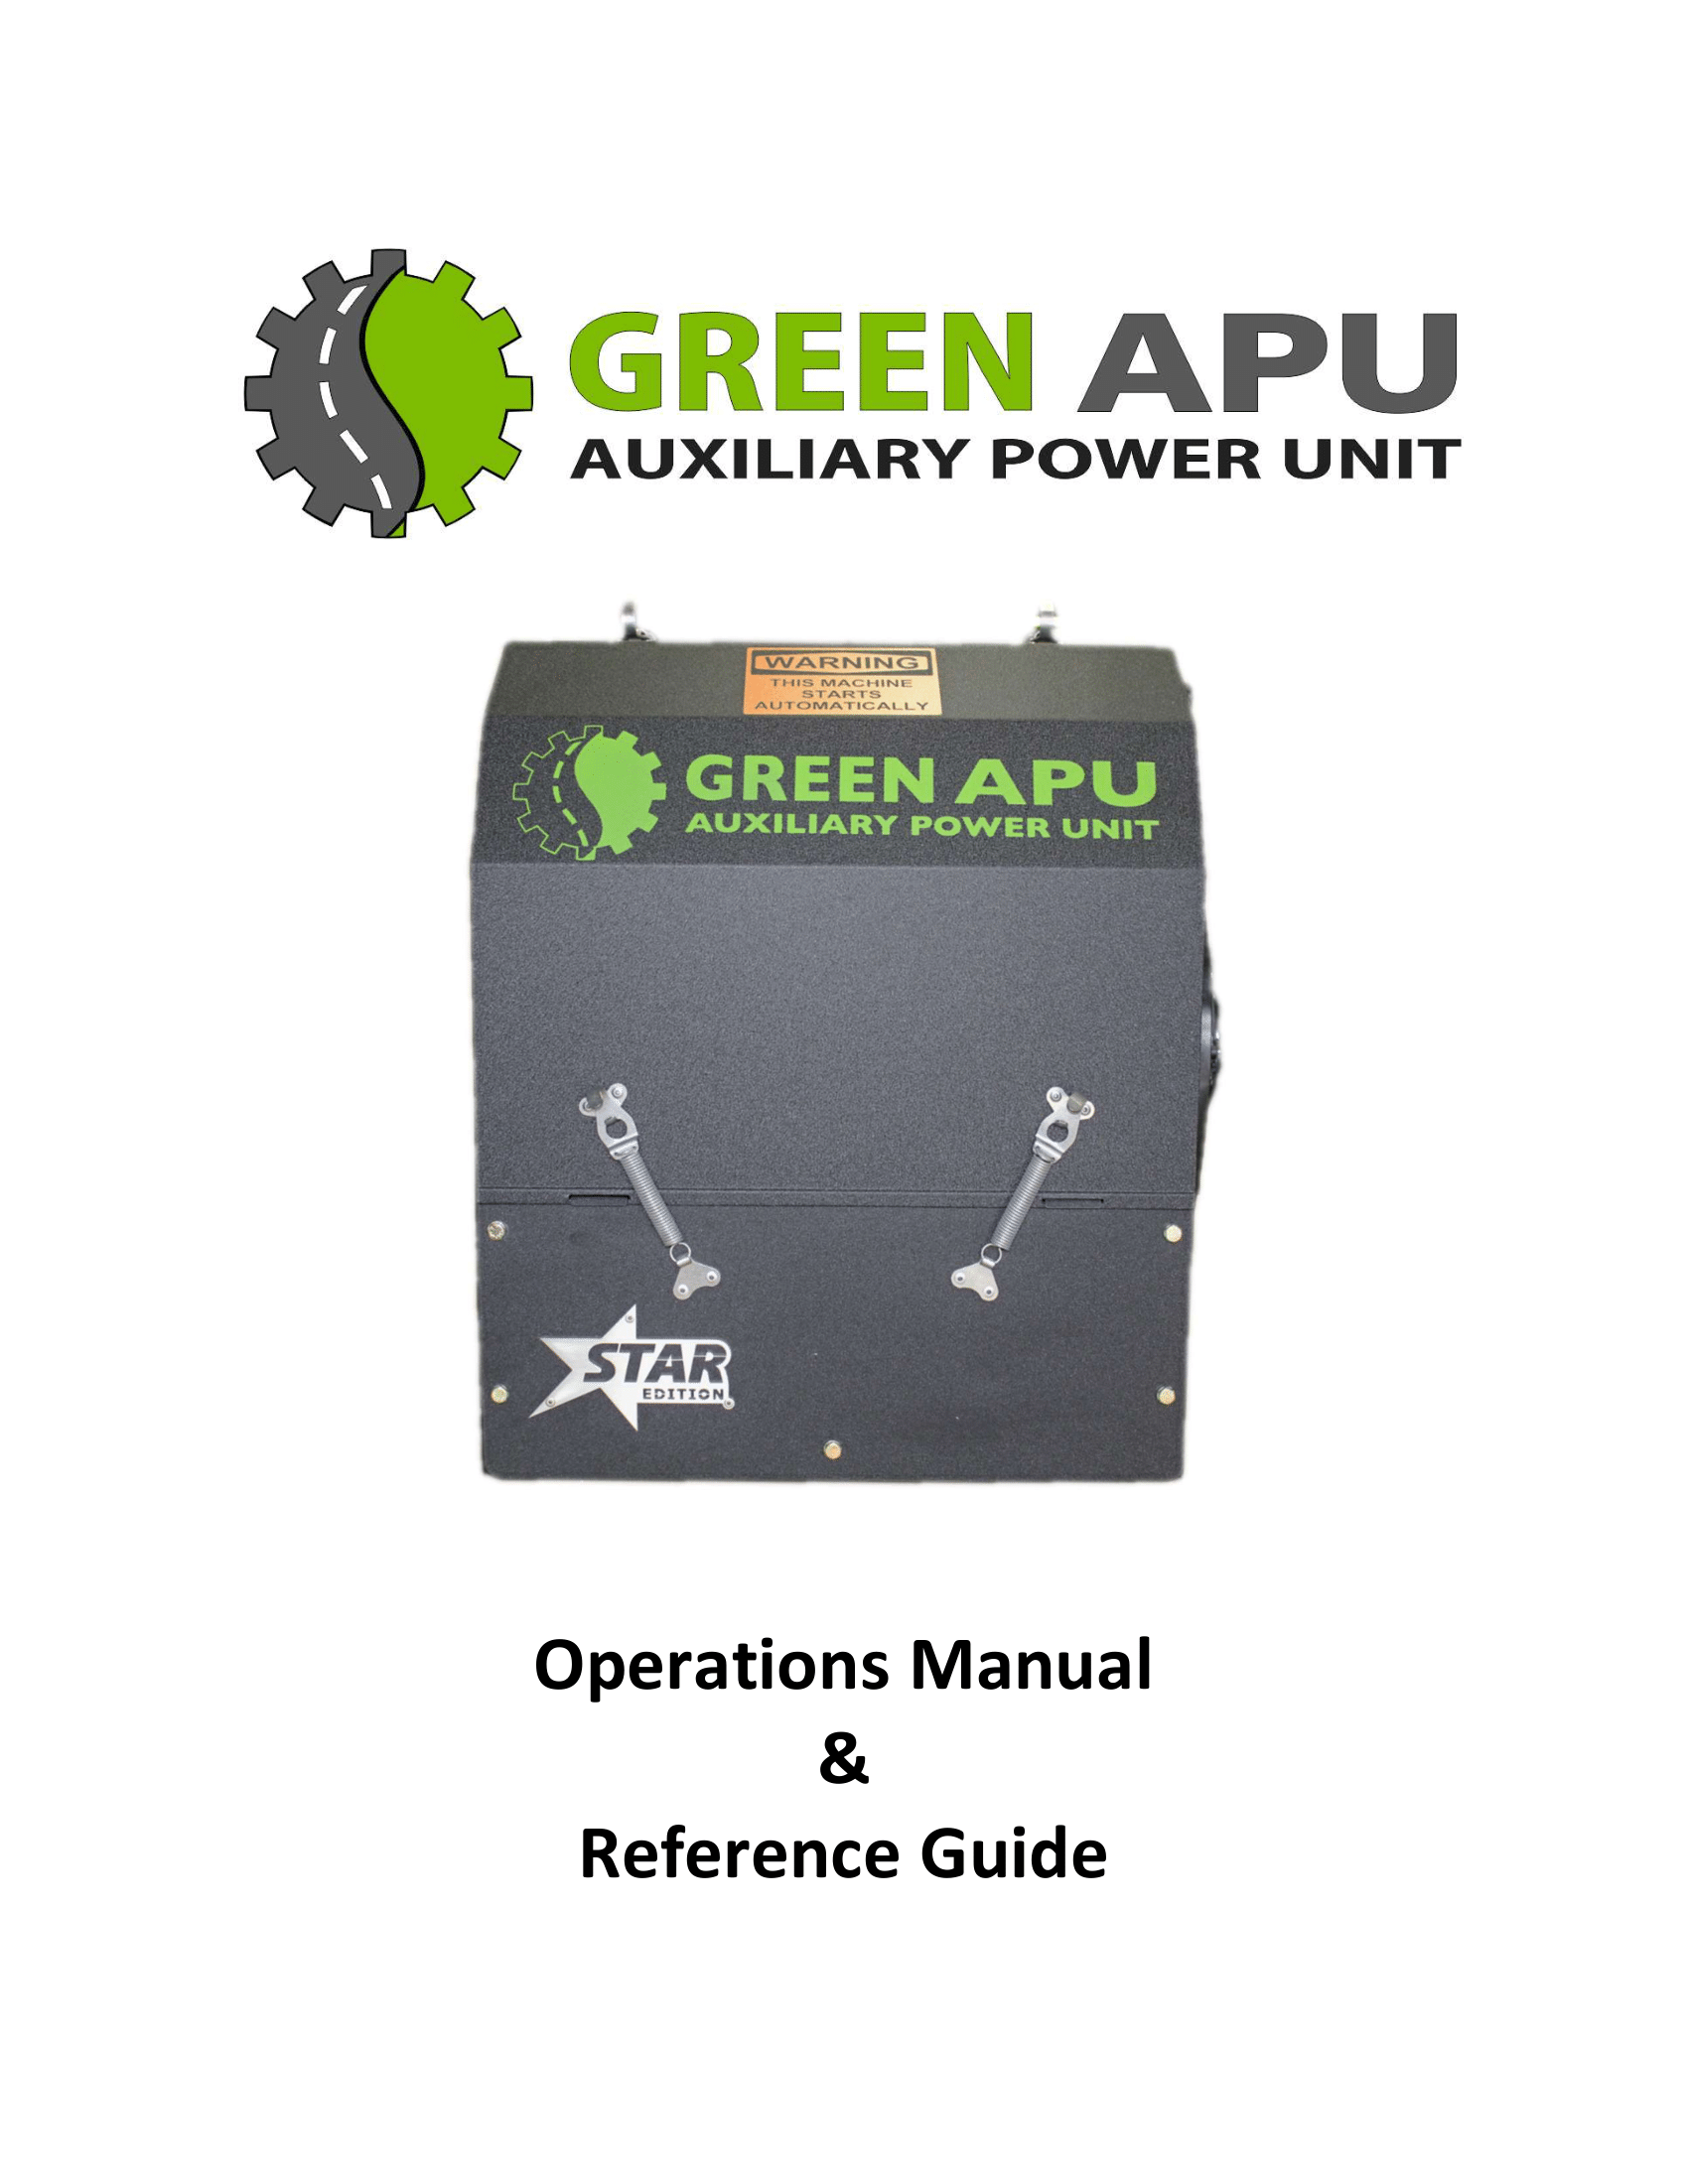 Green APU Auxiliary Power Unit Page One - Rome, NY - R.B. Humphreys, Inc.